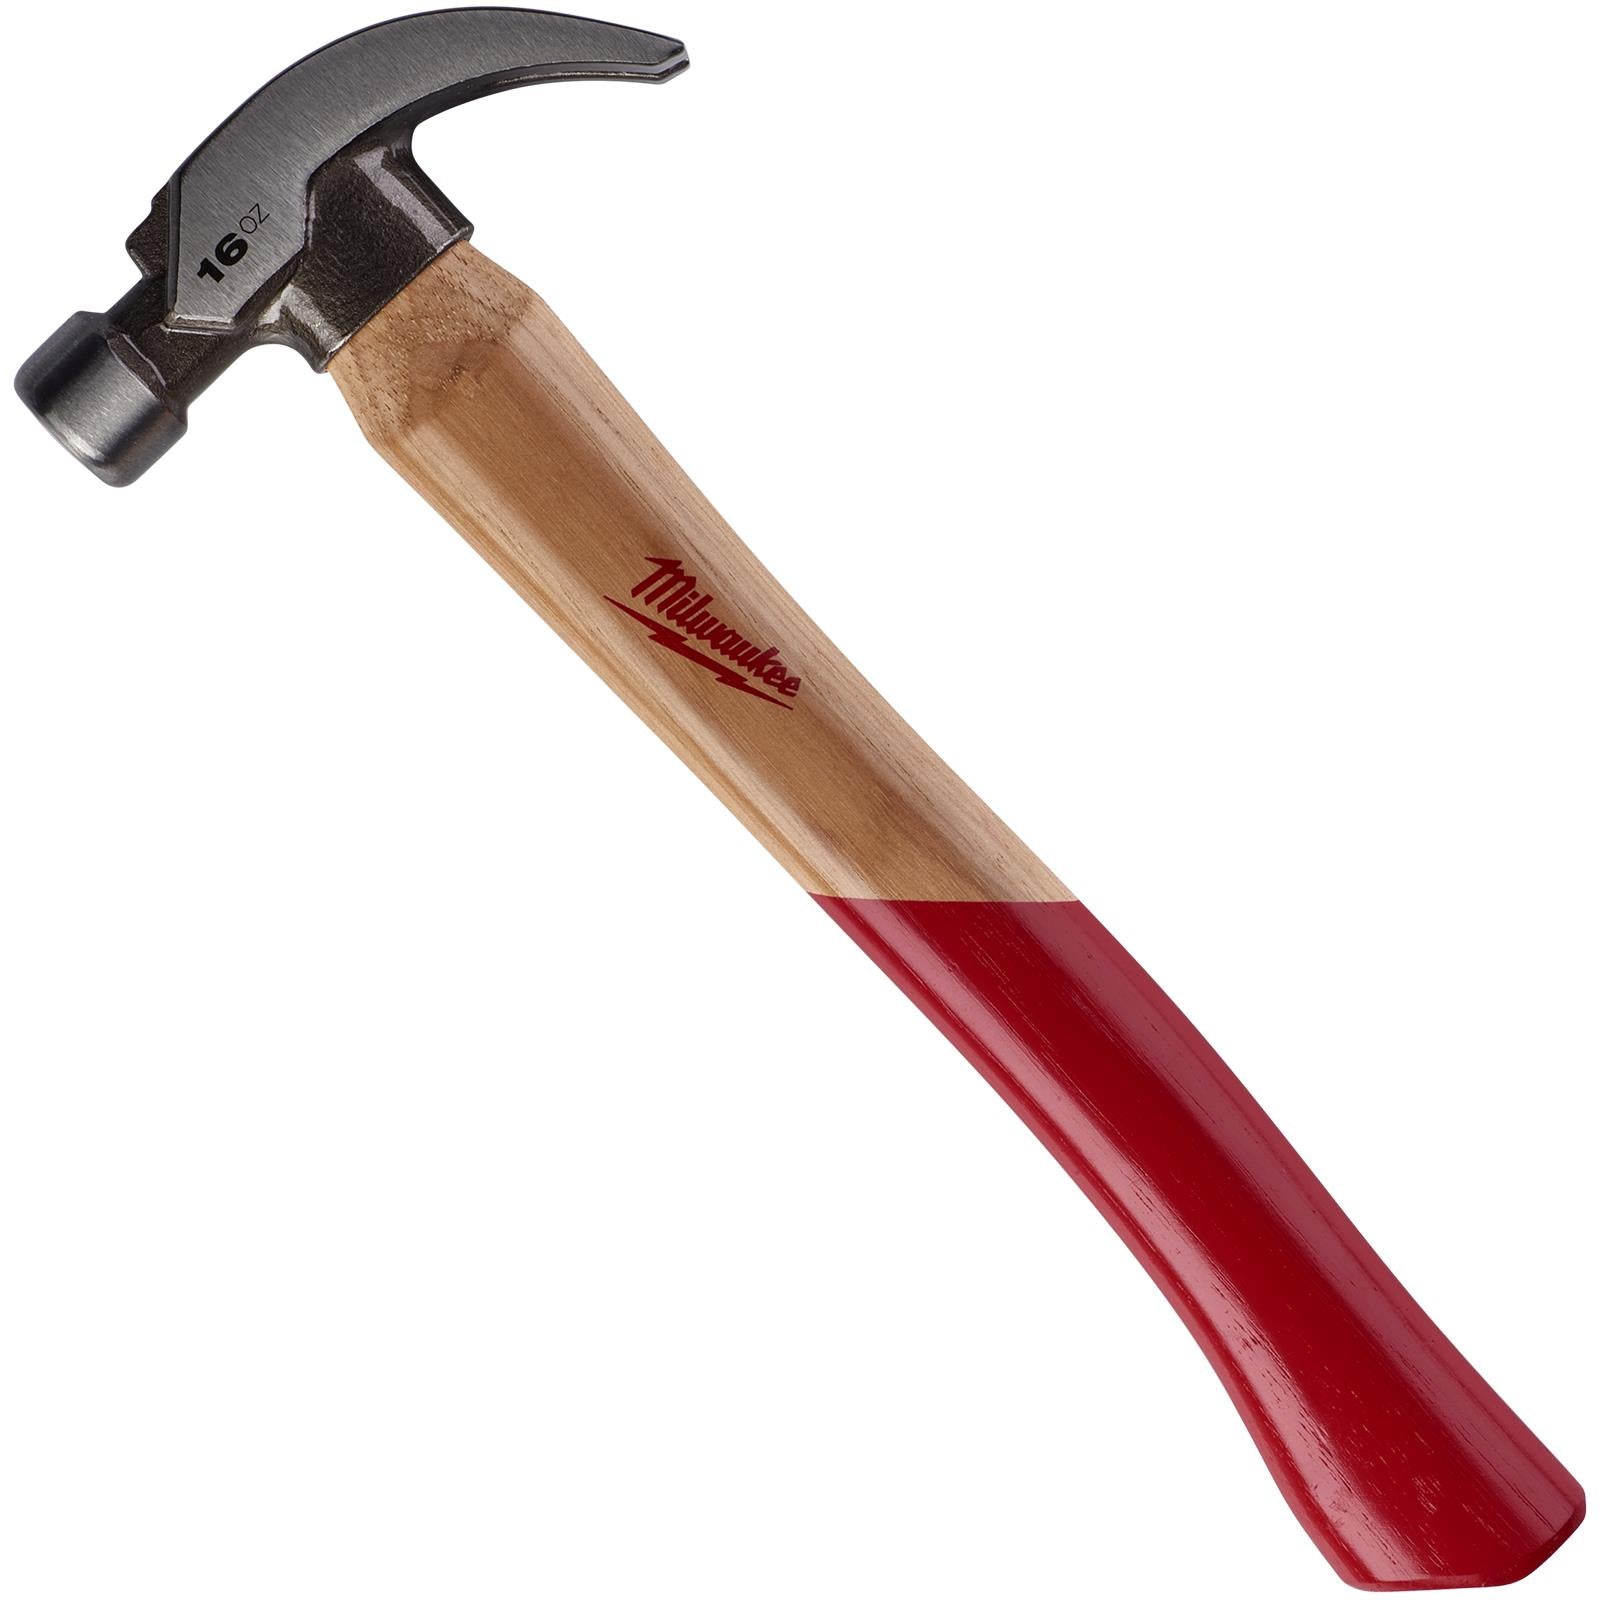 Milwaukee Curved Claw Hammer 16oz 450g with Hickory Wooden Shaft